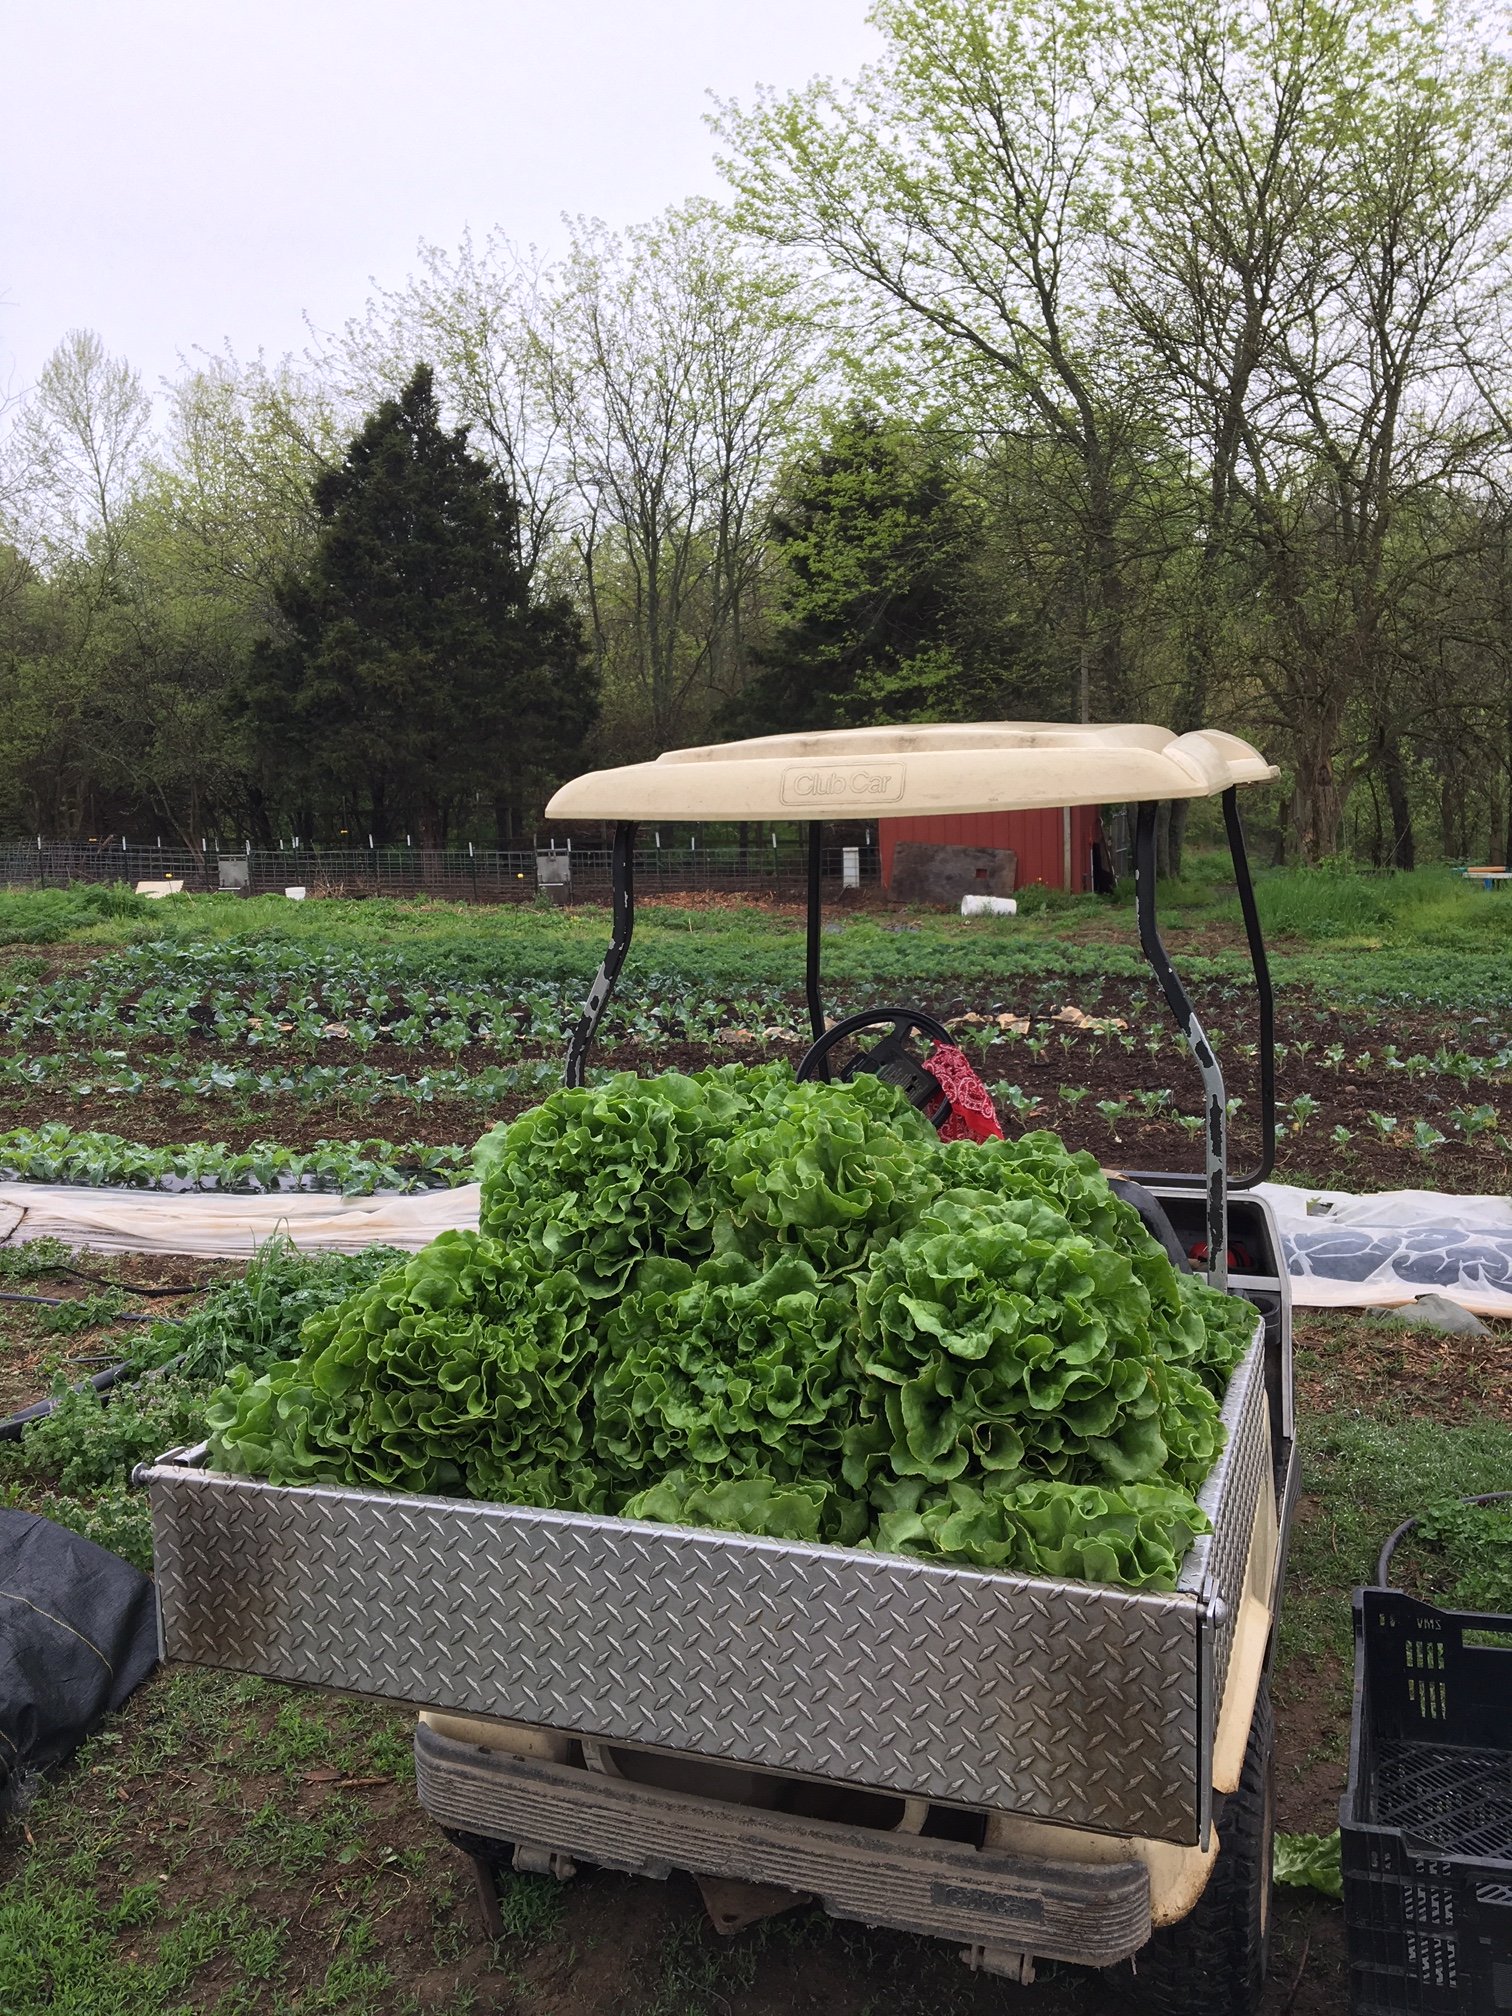 Dinner on the Farm! for May 7, 2019